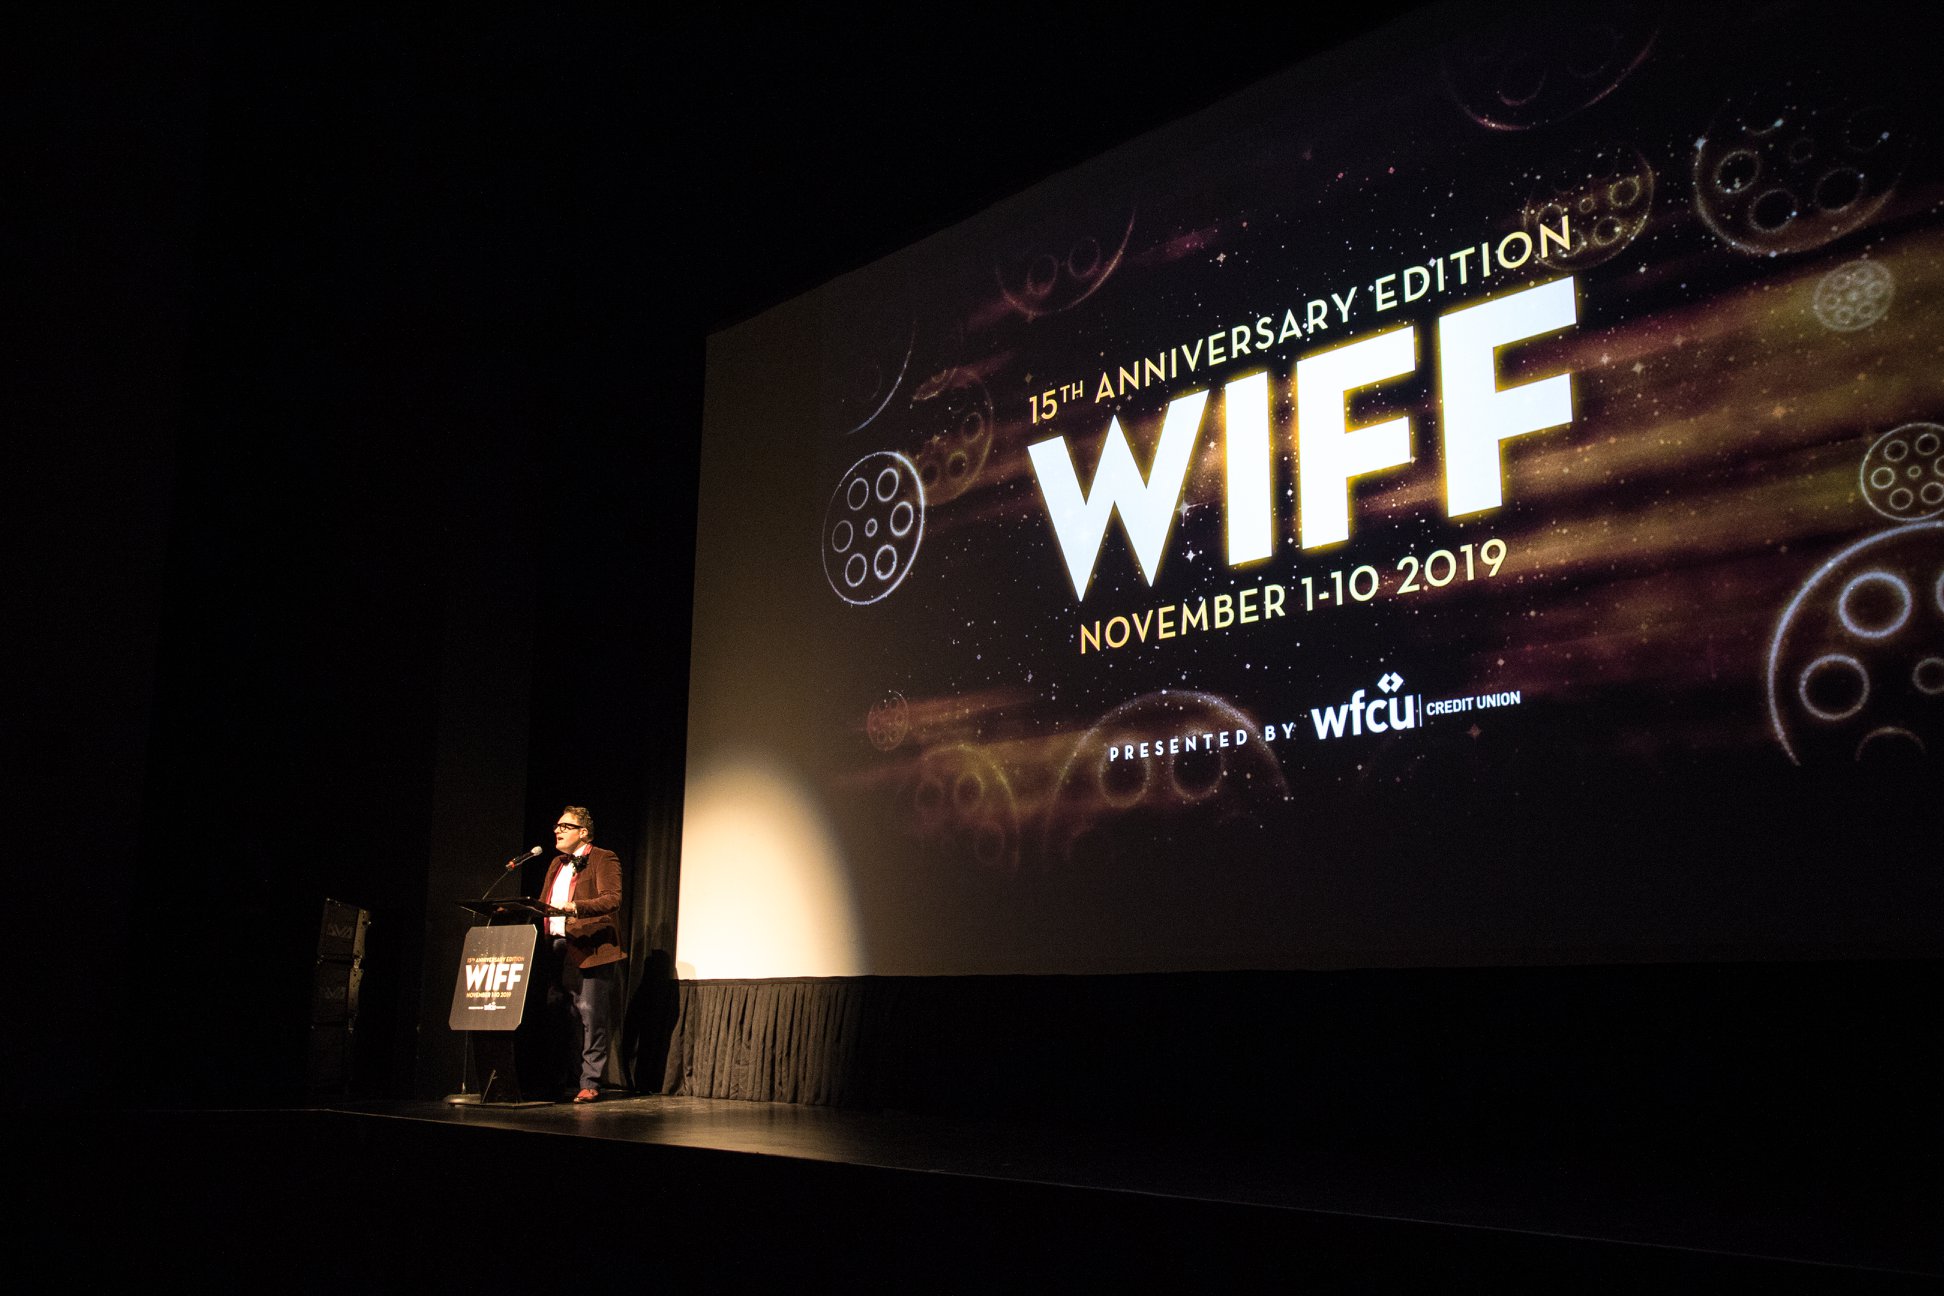 Photo from the Windsor International Film Festival's Facebook page.